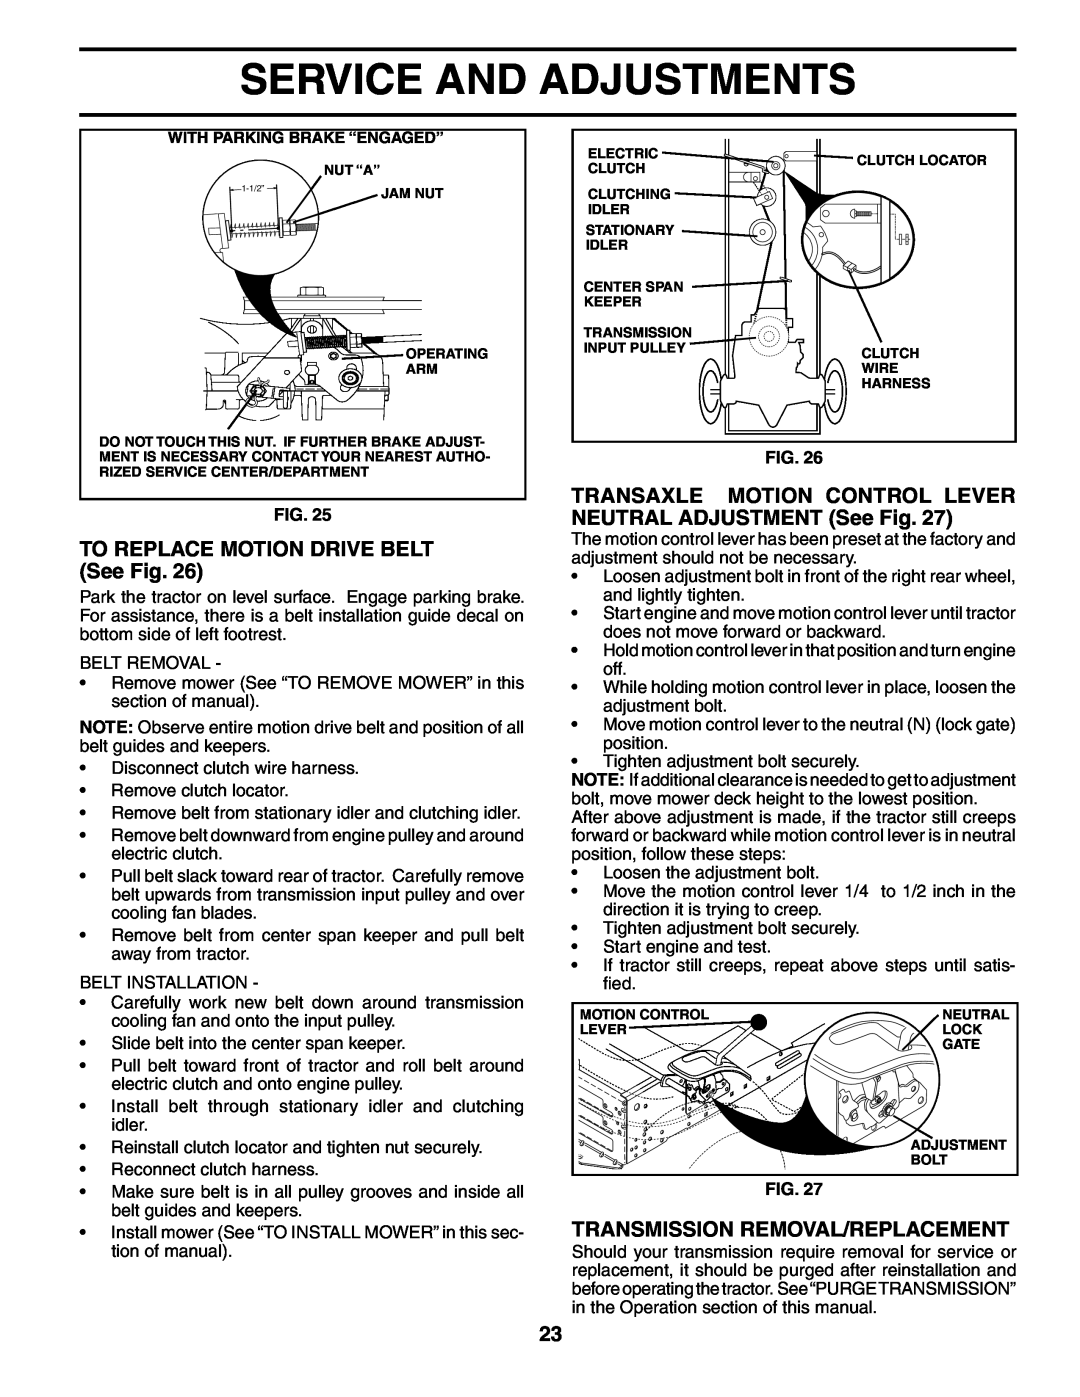 Poulan POGT20H48STA manual TO REPLACE MOTION DRIVE BELT See Fig, TRANSAXLE MOTION CONTROL LEVER NEUTRAL ADJUSTMENT See Fig 